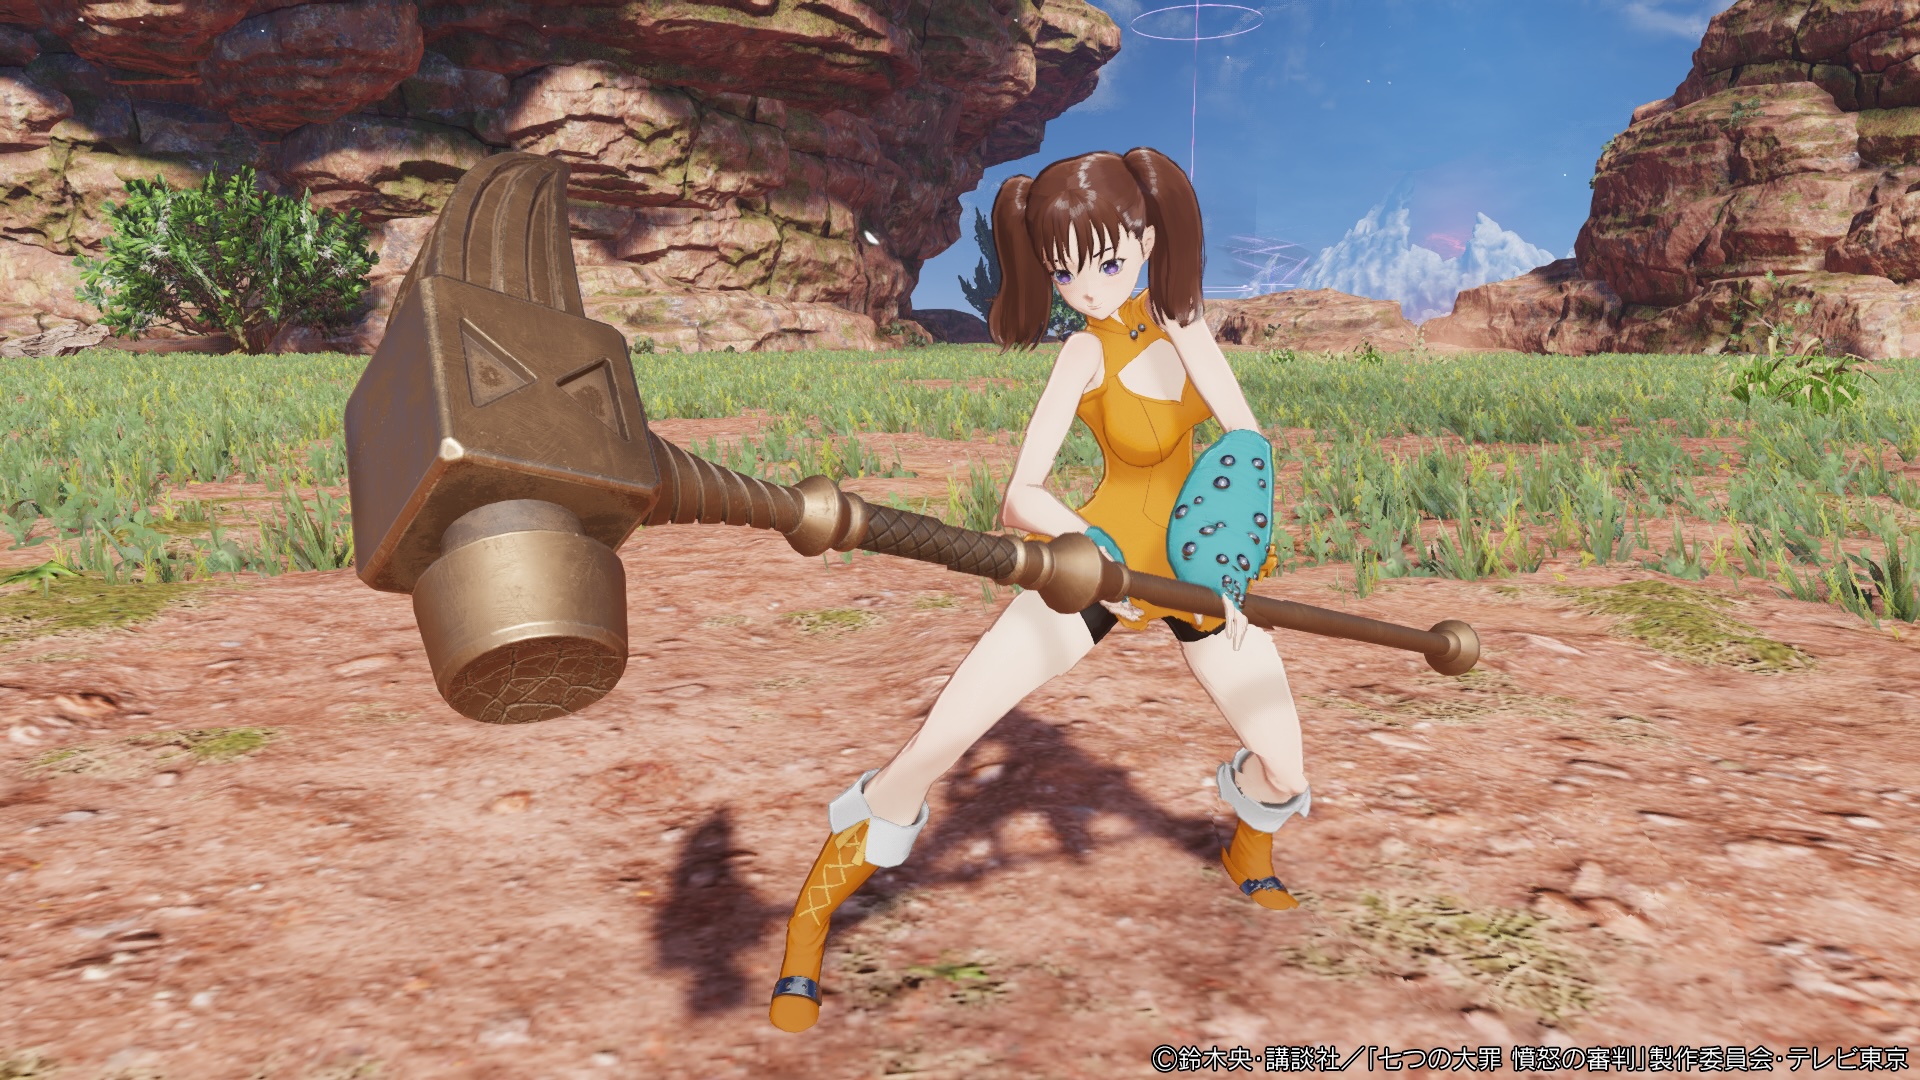 Phantasy Star Online 2 New Genesis Launches Collab With The Seven Deadly Sins: Dragon’s Judgement